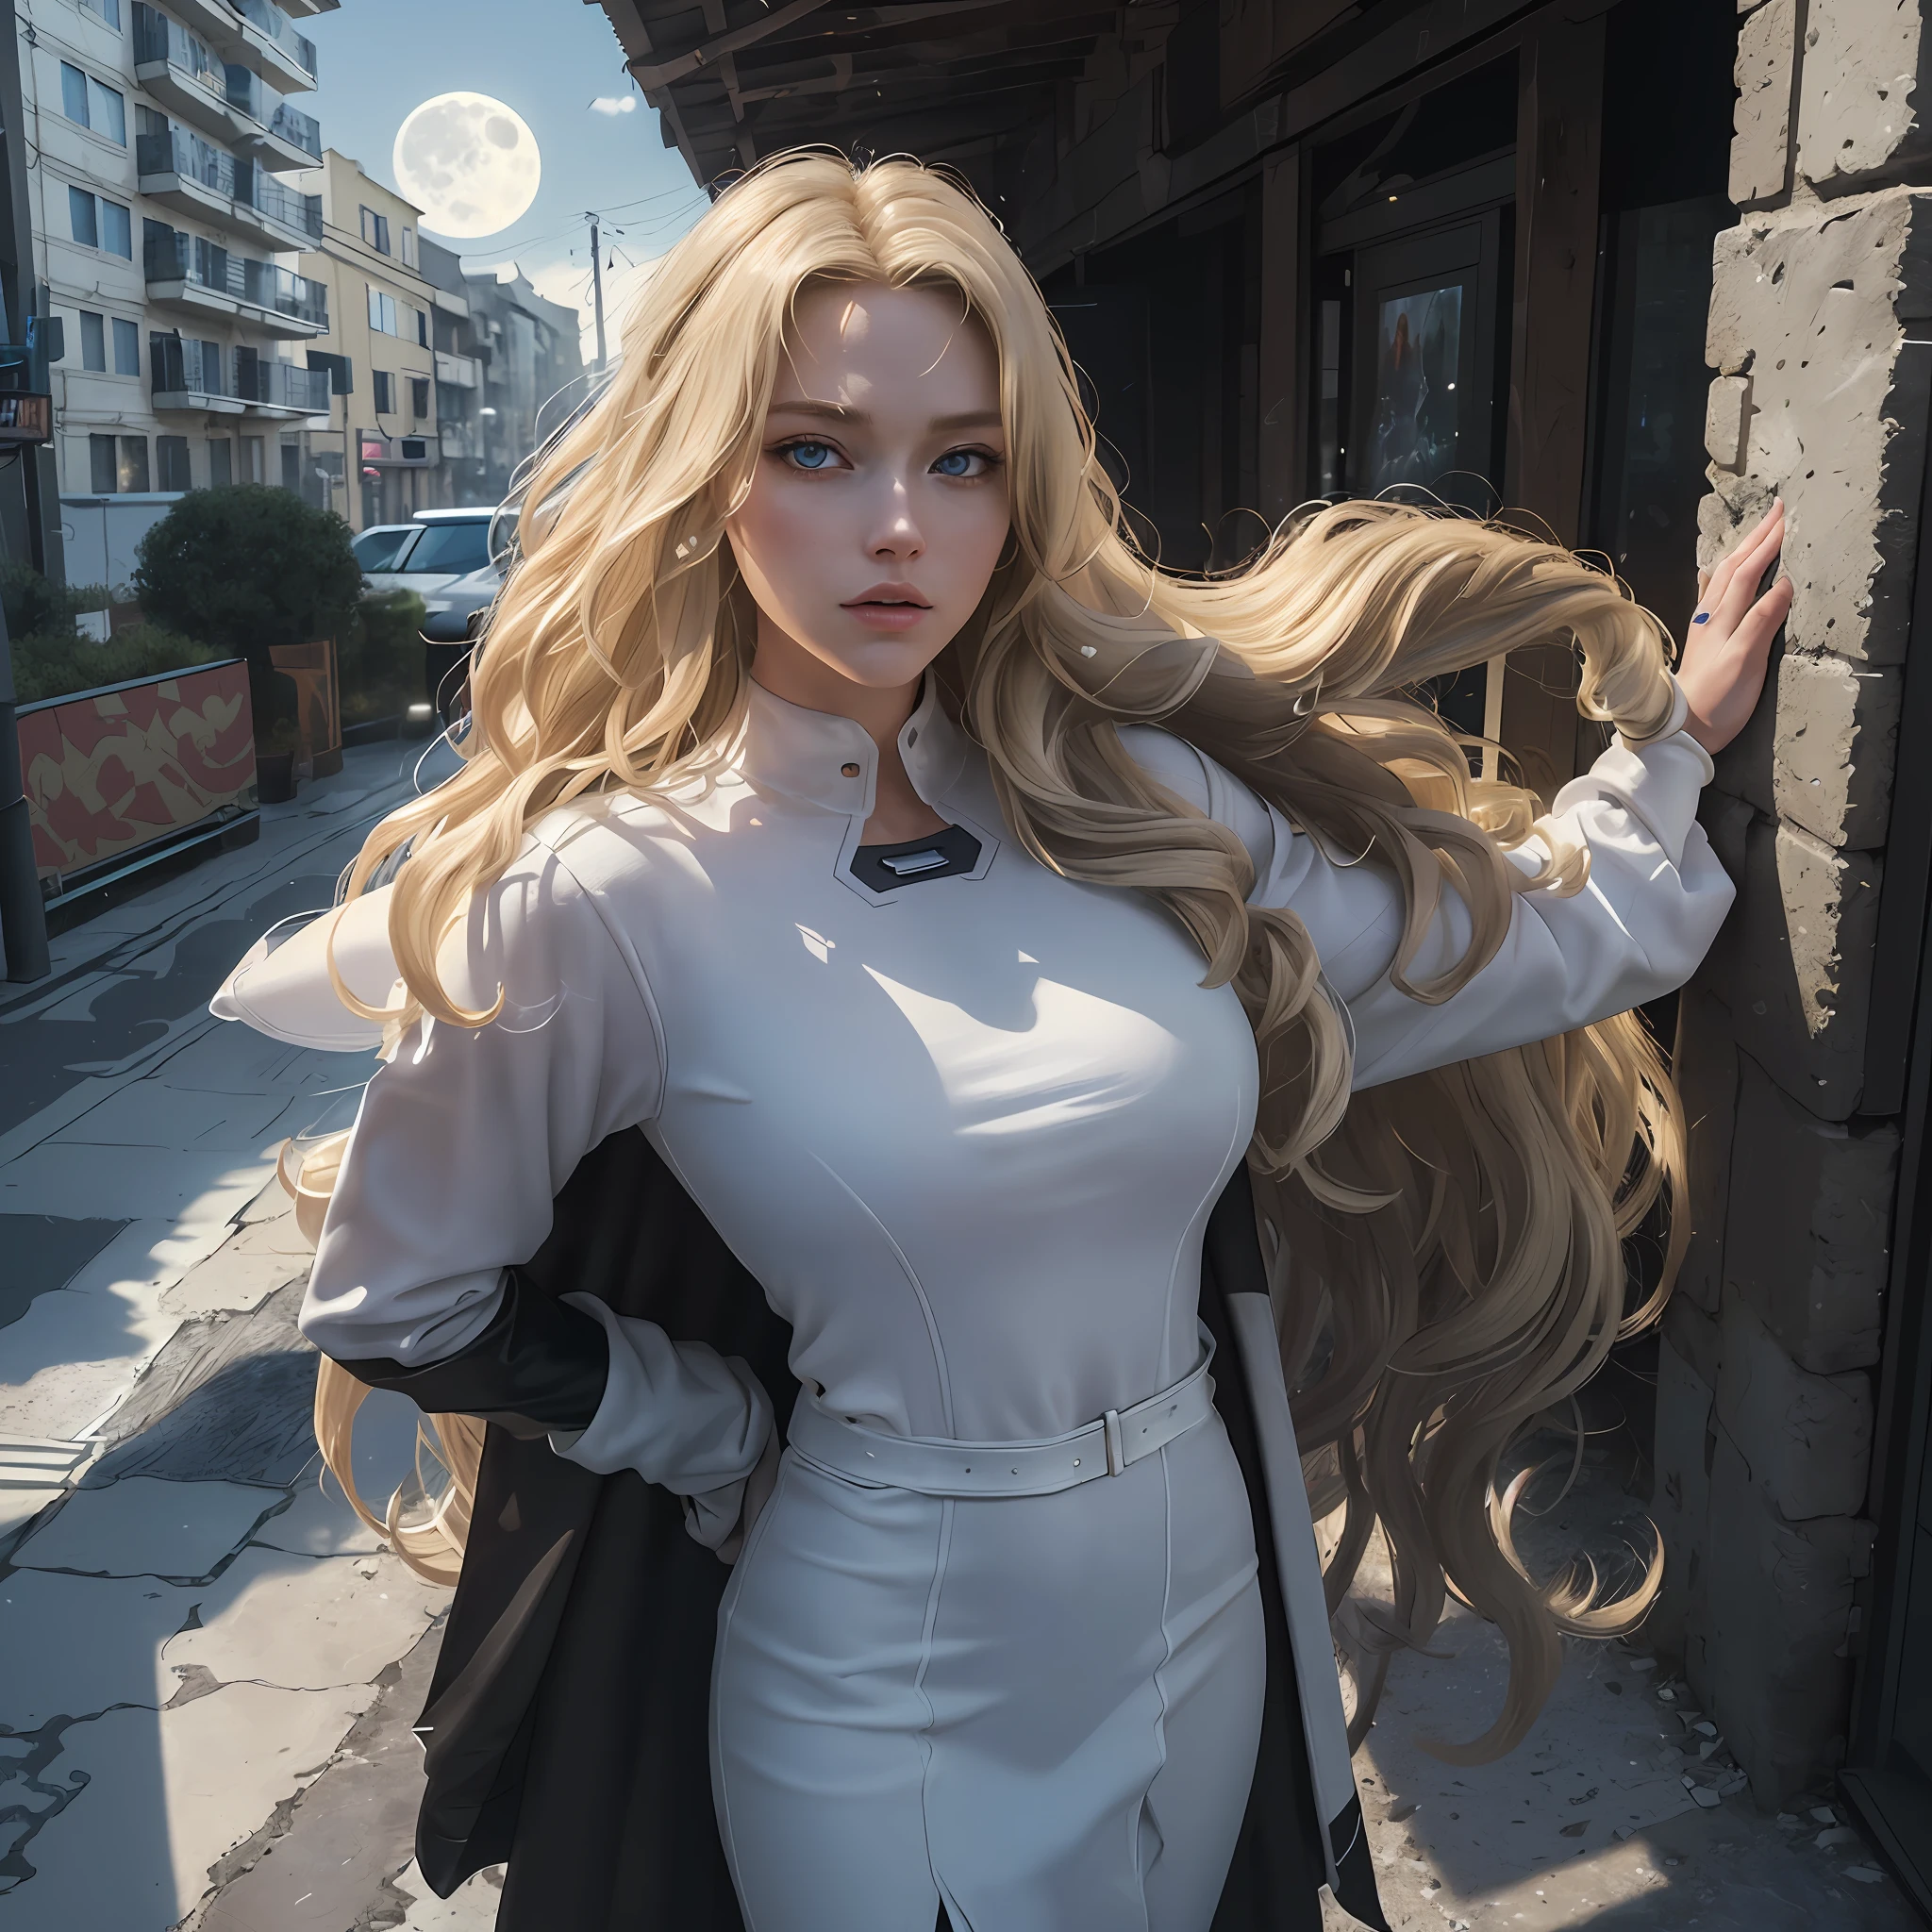 (Masterpiece, 4k resolution, ultra-realistic, very detailed), (White superhero theme, charismatic, there's a girl on top of town, wearing Absolute Comics white widow costume, she's a superhero), [ ((25 years), (long wavy blonde hair:1.4), full body, (blue eyes:1.2), ((black widow pose,show of strength, jump from one building to another), ((sandy urban environment):0.8)| (cityscape, at night, dynamic lights), (full moon))] # Explanation: The Prompt mainly describes a 4K painting of ultra-high definition, very realistic, very detailed. It shows a superheroine at the top of the city, wearing a white widow costume from Absolute Comics The theme in the painting is a white superhero theme, the female protagonist has long wavy blonde hair is 25 years old and her entire body is shown in the painting. In terms of portraying the actions of superheroines, spiders are slaves, details of a black symbiote in uniform